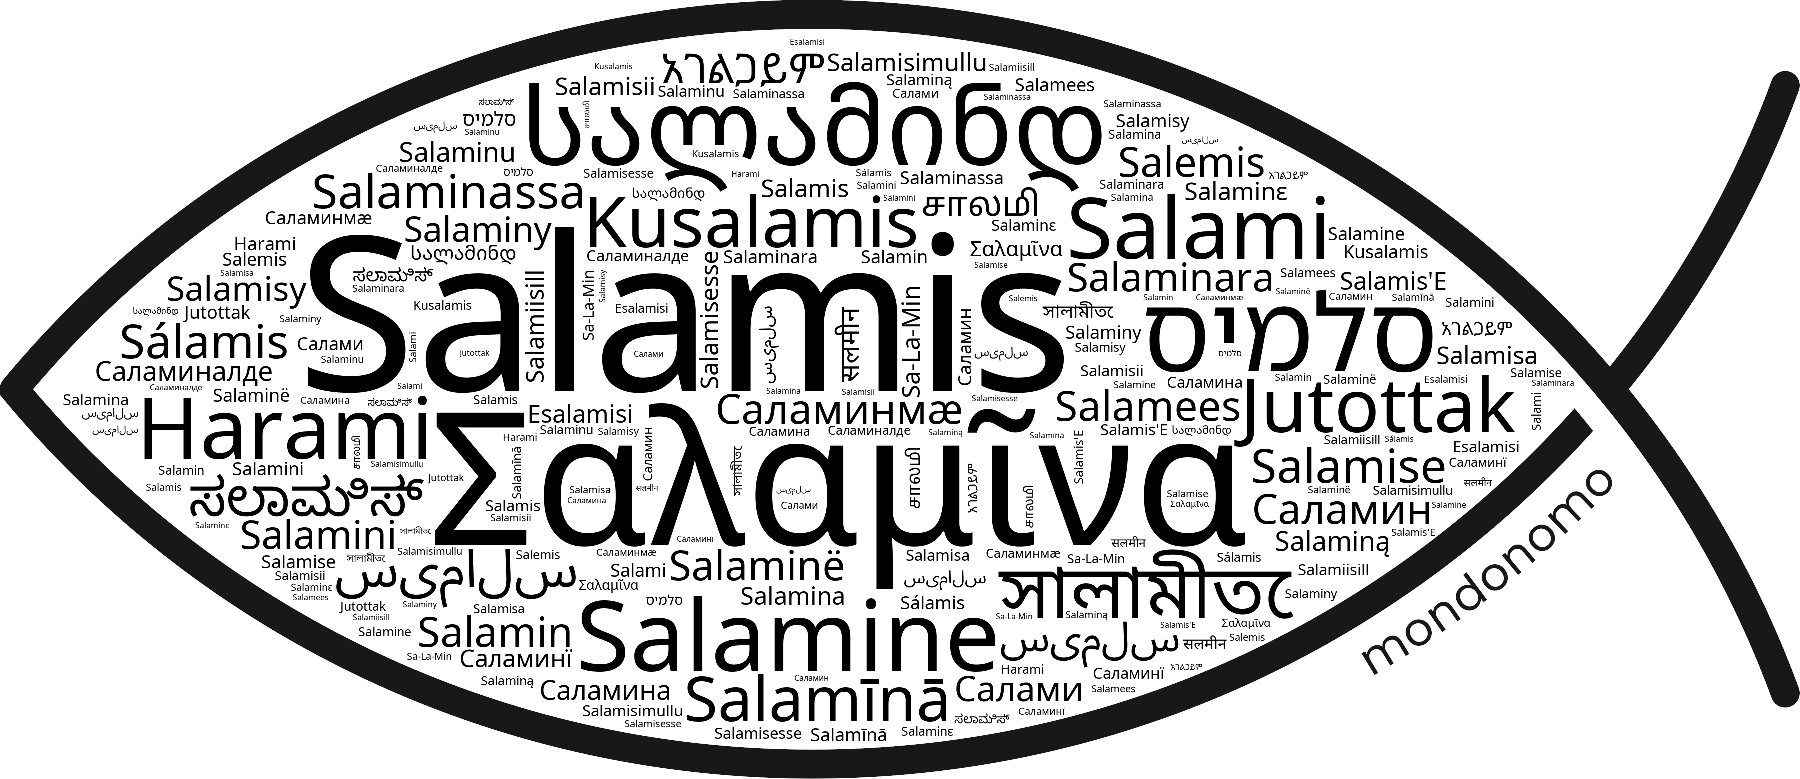 Name Salamis in the world's Bibles